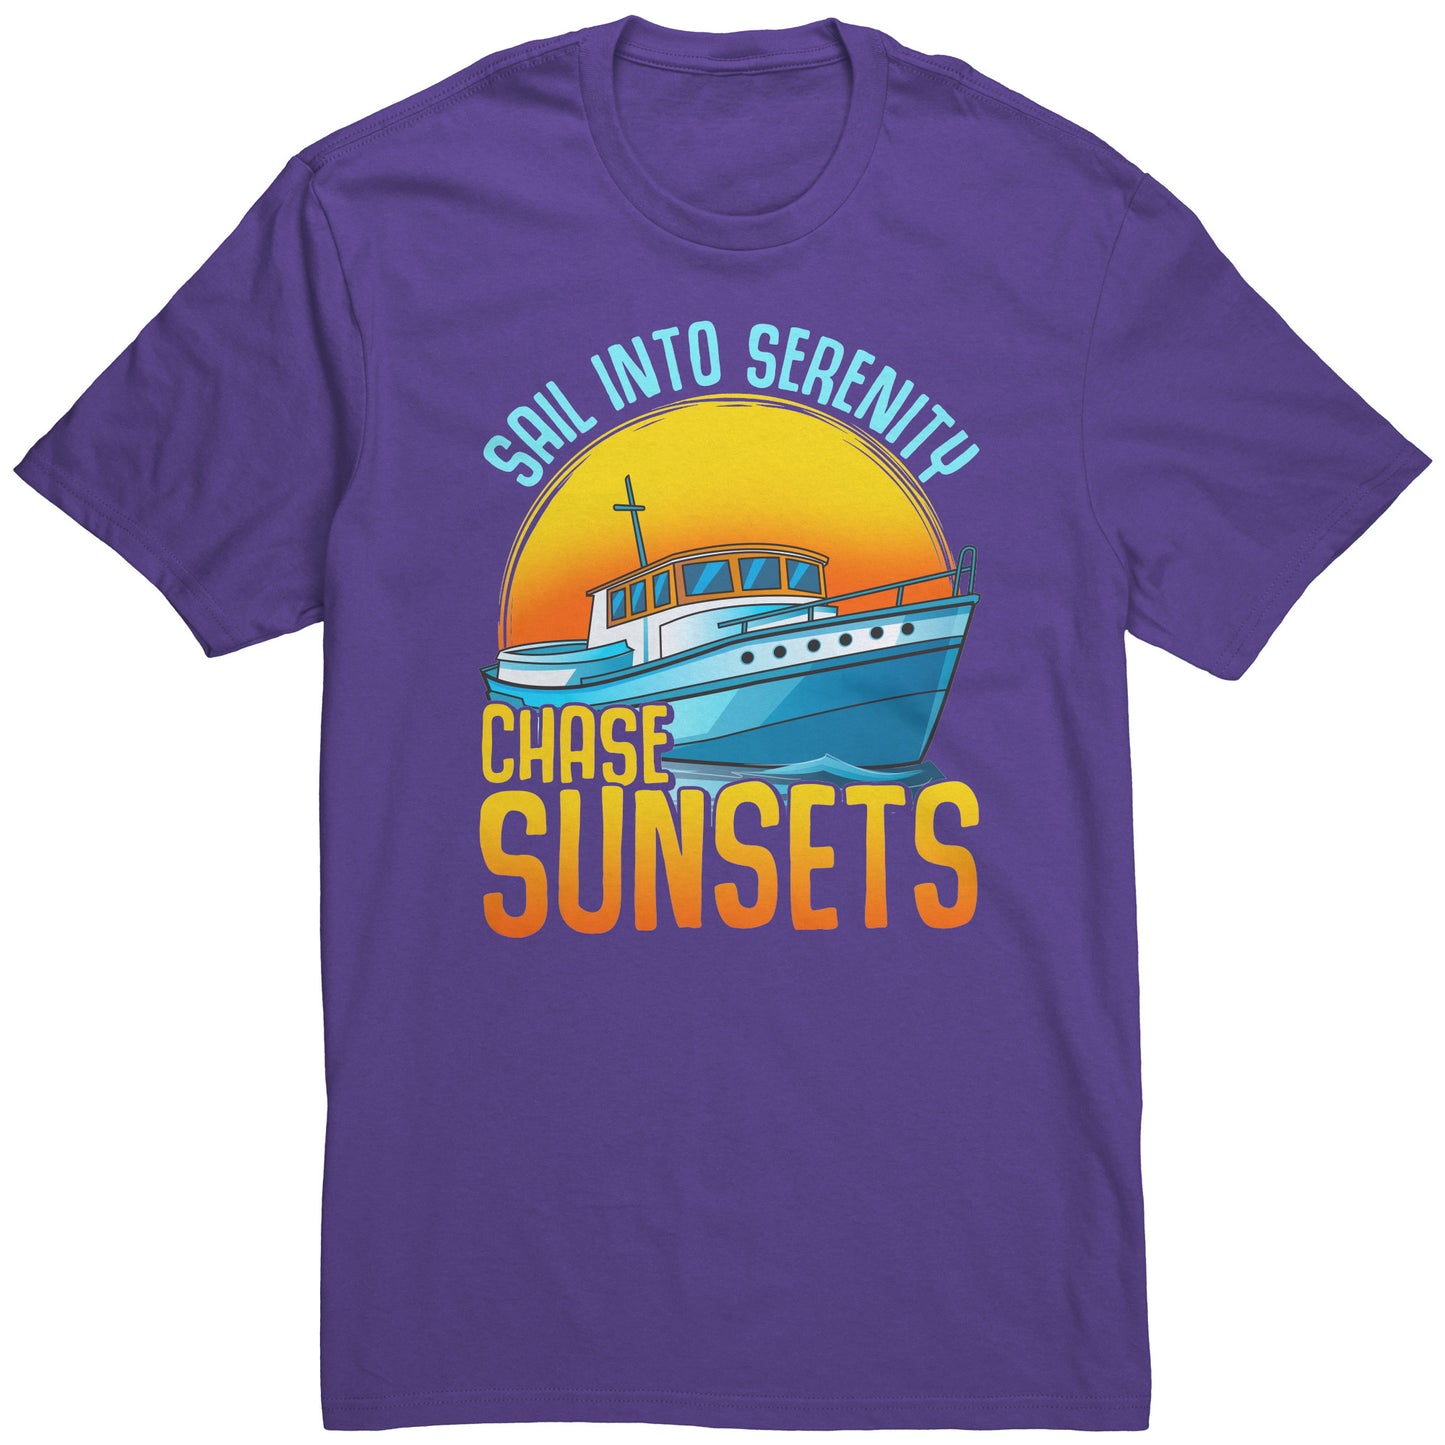 Sail Into Serenity Chase Sunsets - Boat Boating Men Women T-Shirt